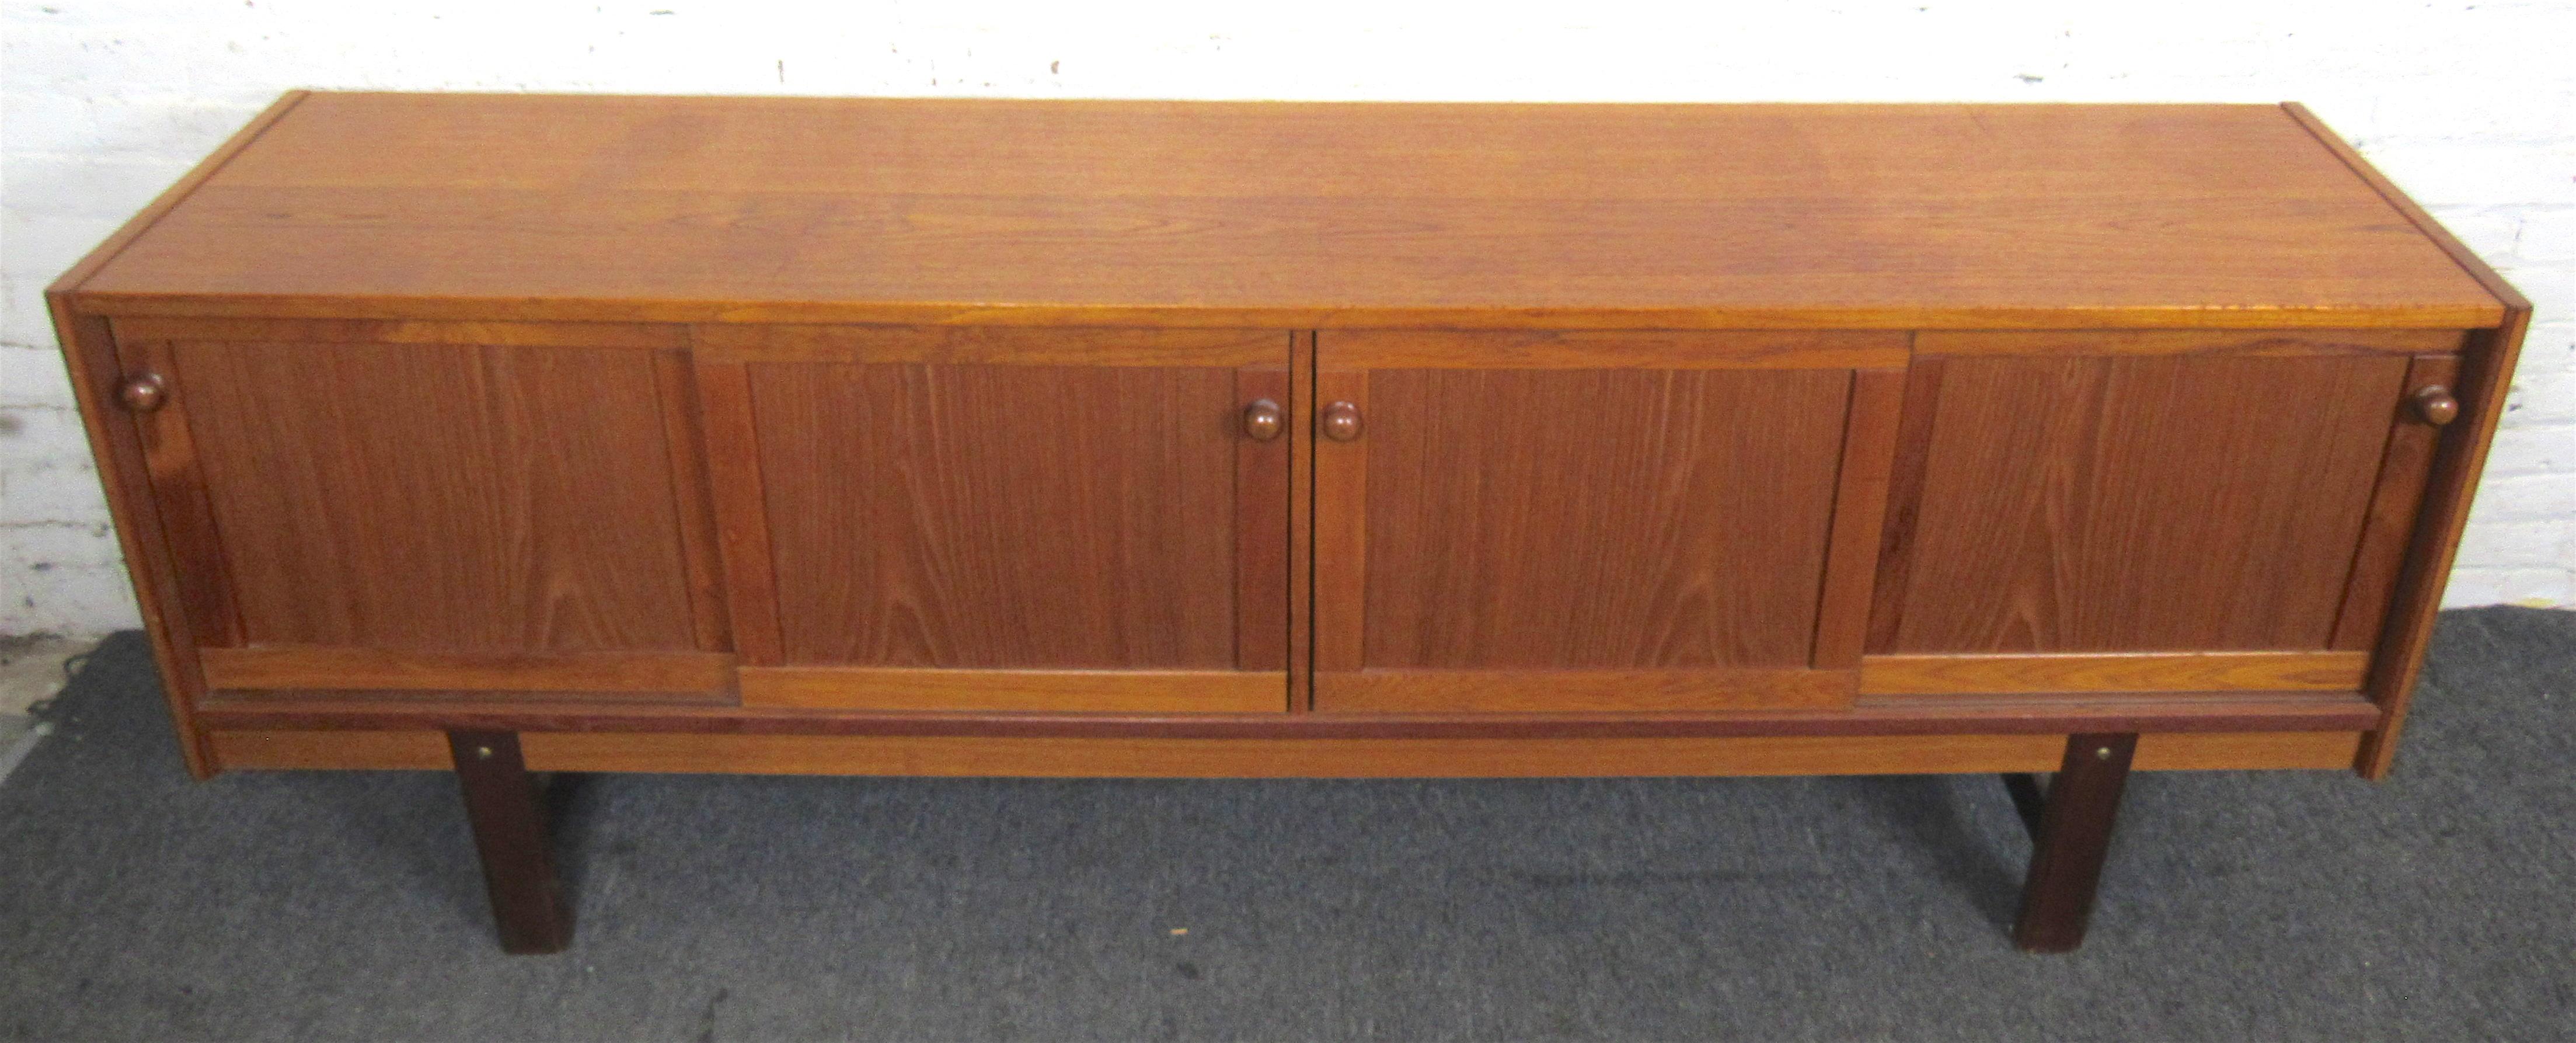 Sliding door cabinet with warm teak wood grain. Simple mid-century modern style and design for home or office use.
(Please confirm location NY or NJ).